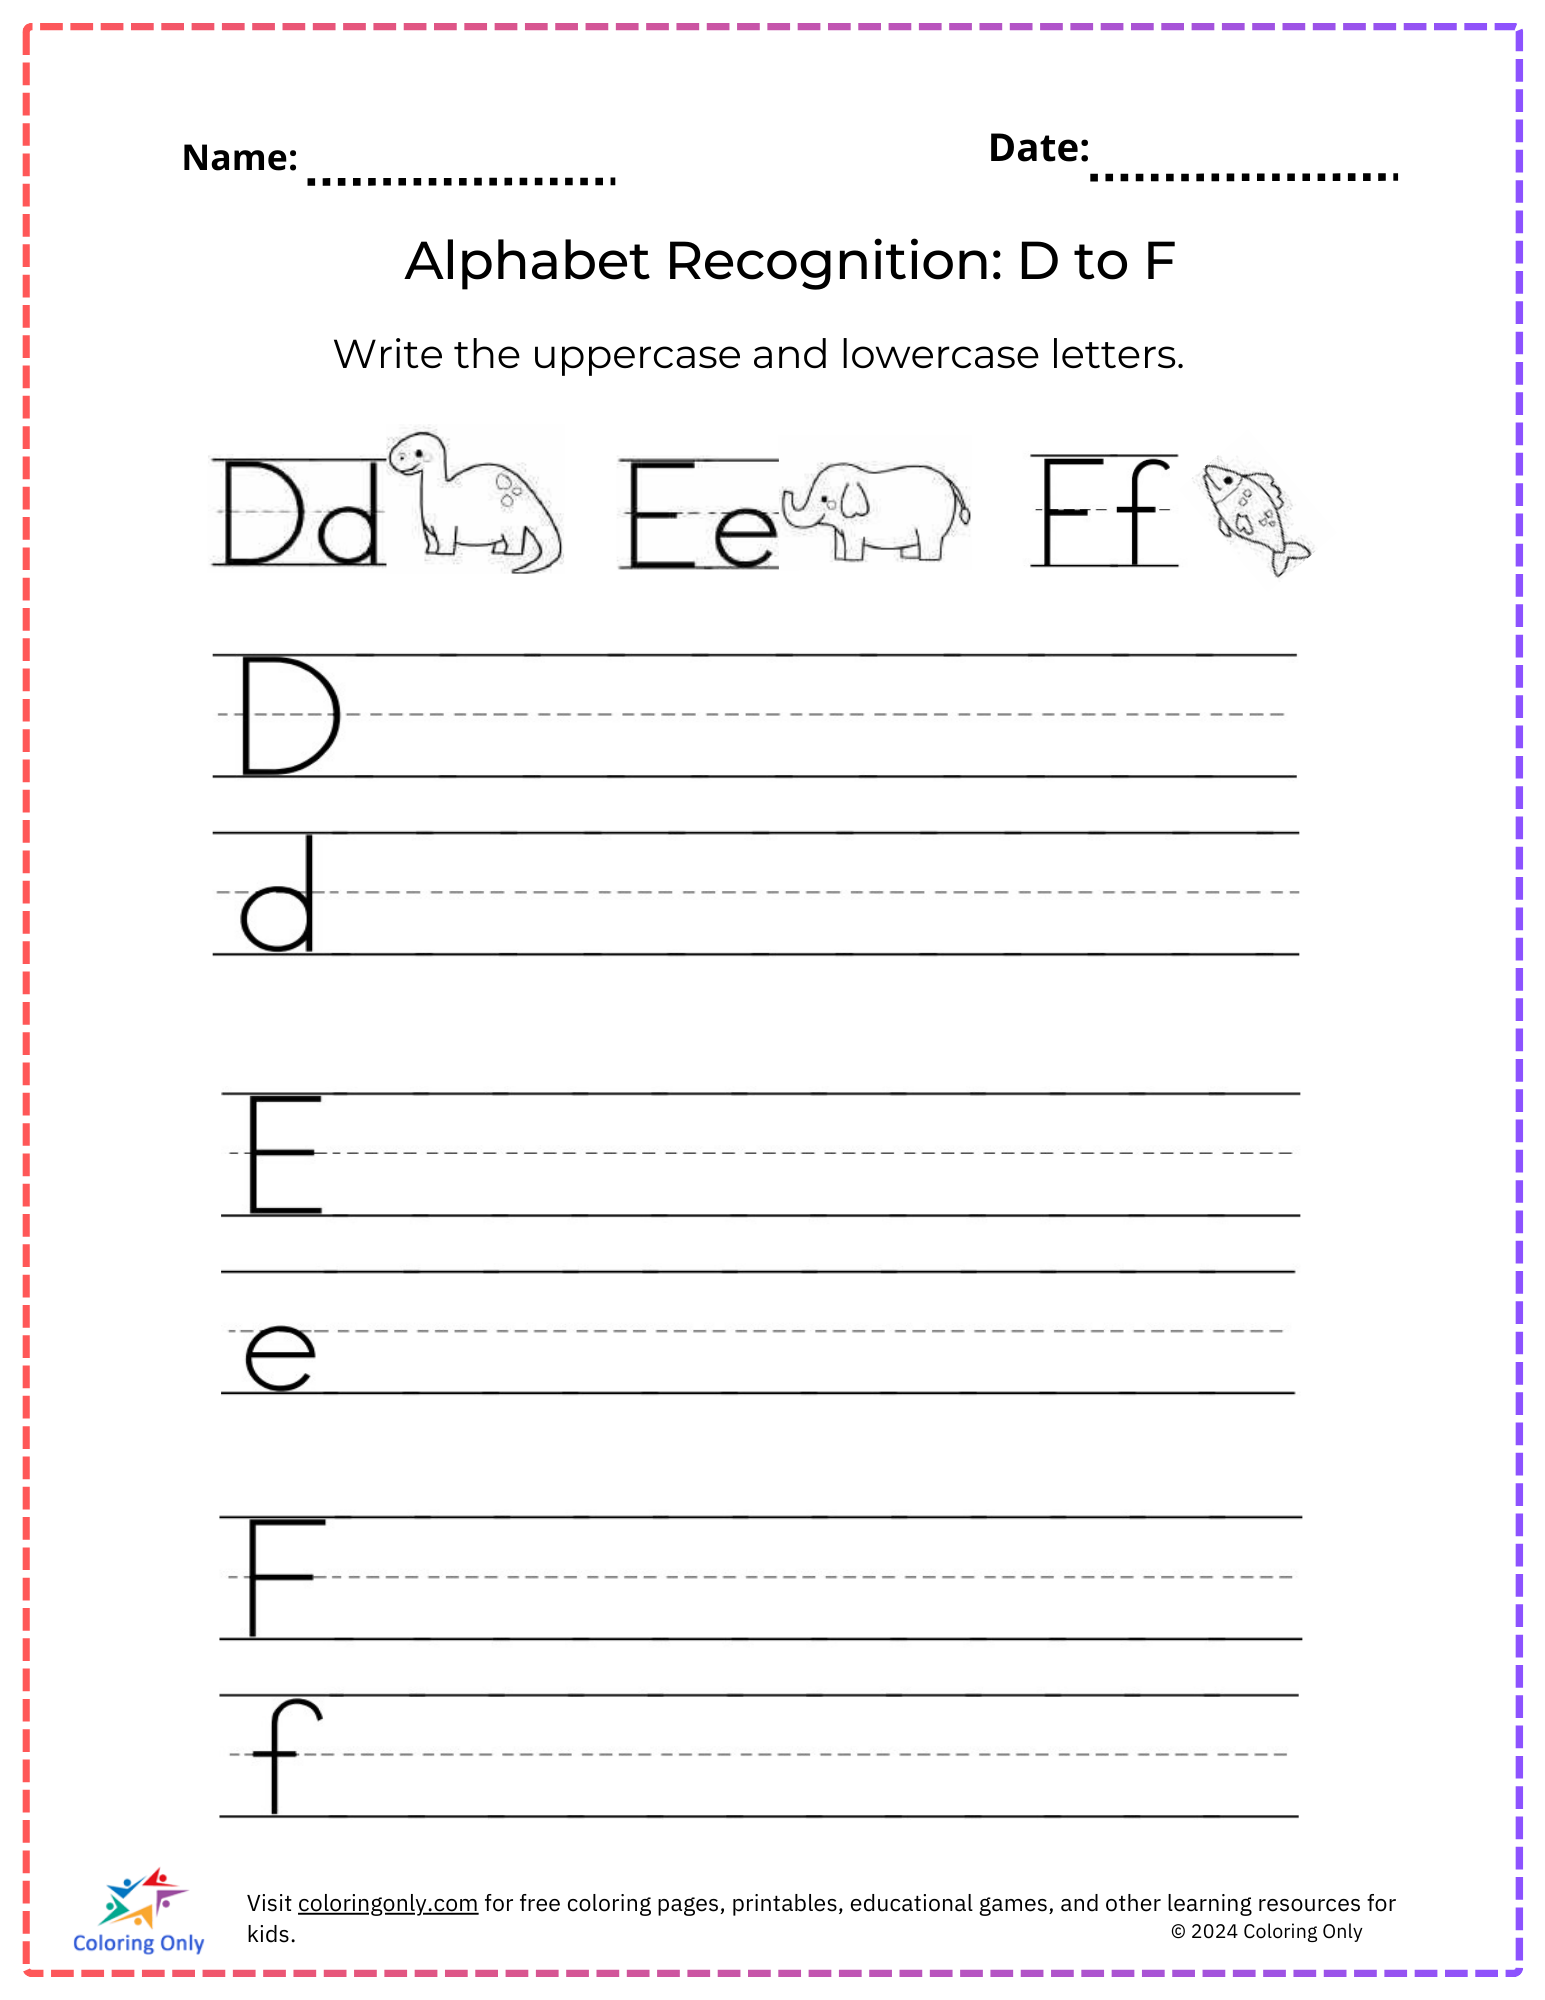 Alphabet Recognition: D to F Free Printable Worksheet